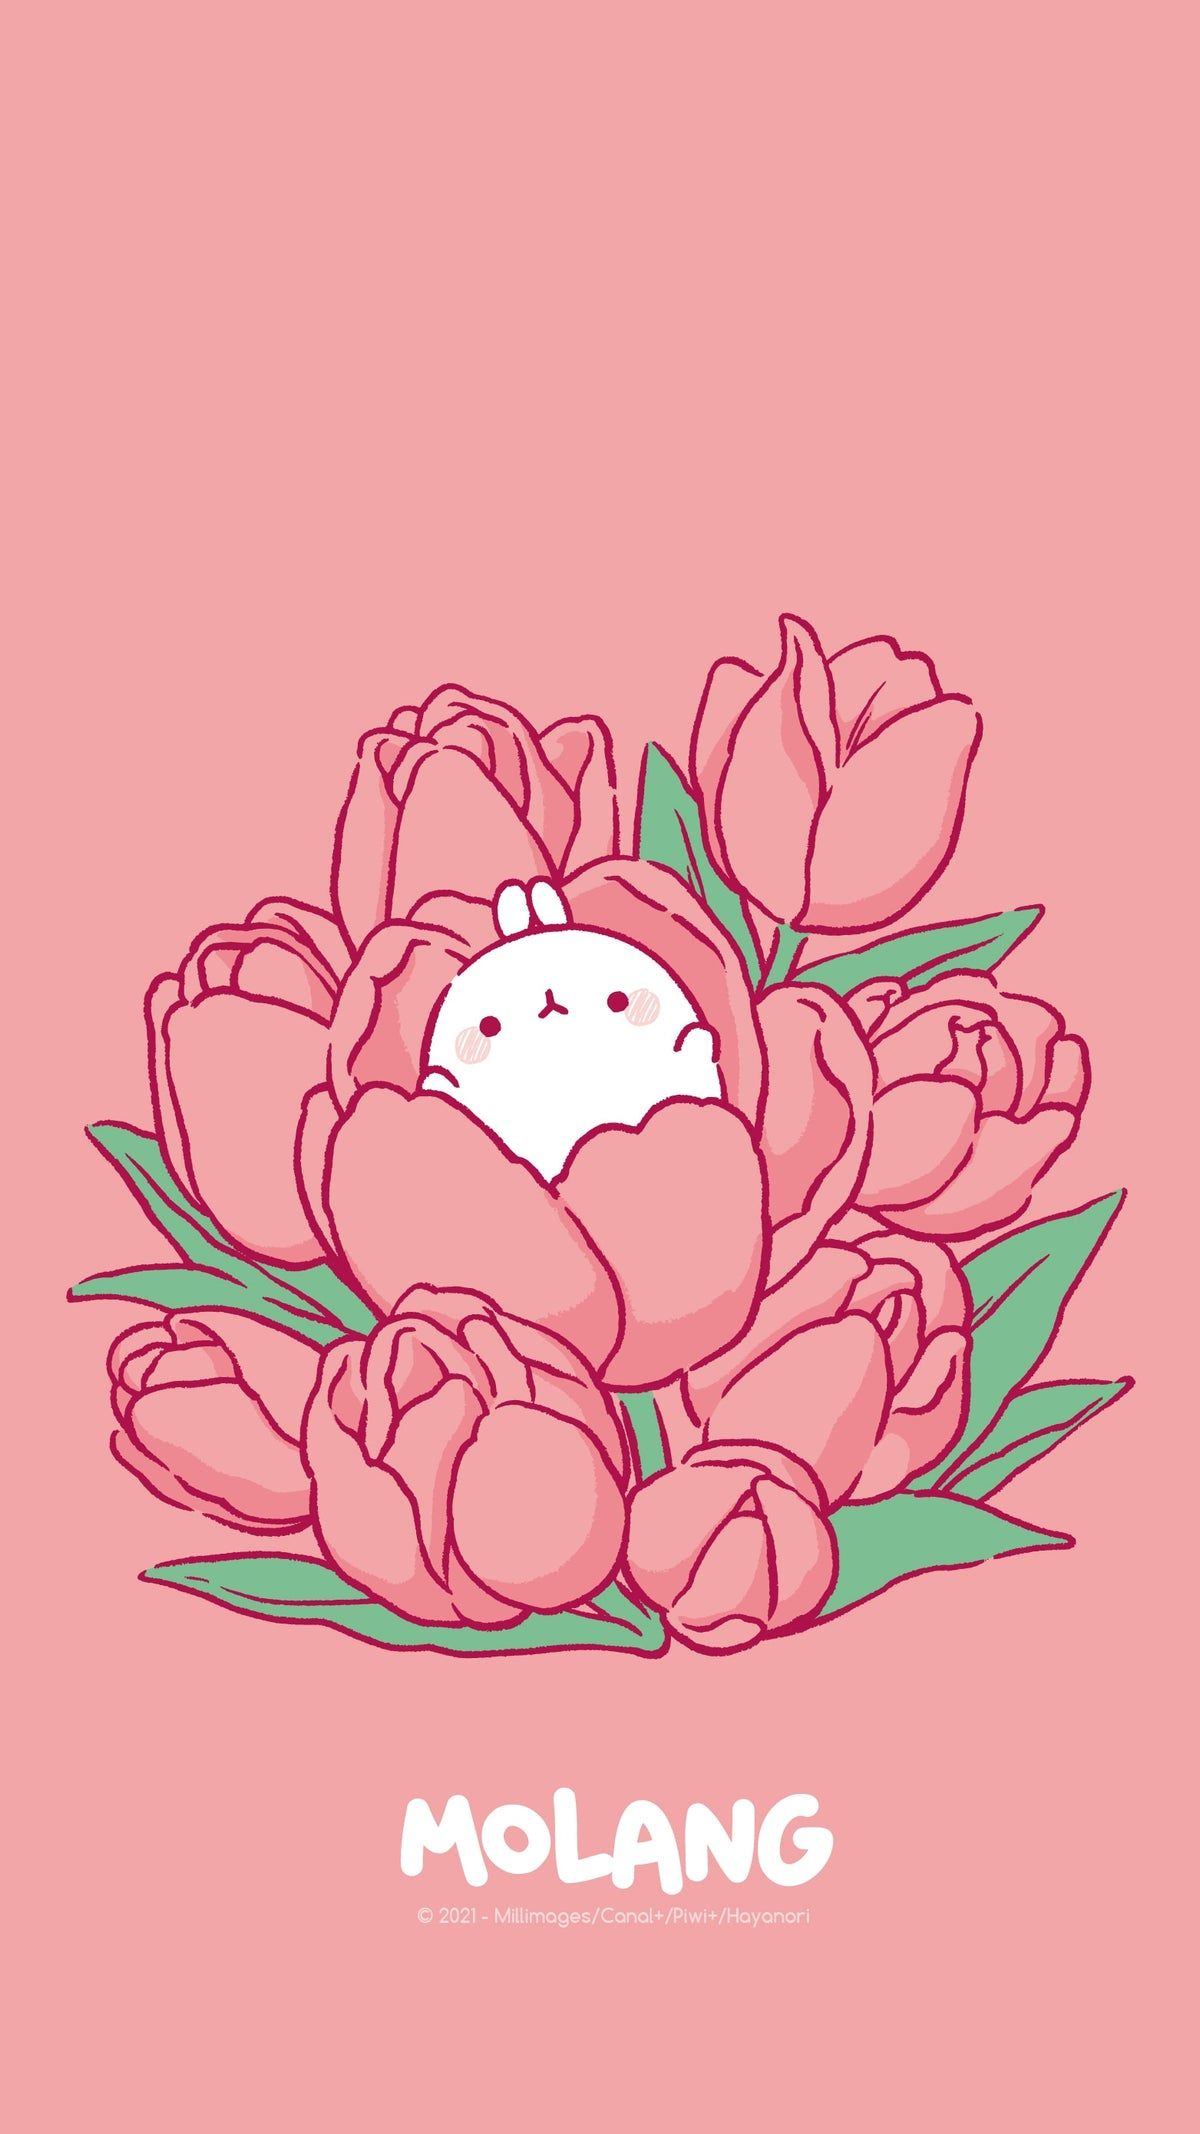 A Molang rabbit hiding in a bouquet of pink flowers on a pink background - Molang